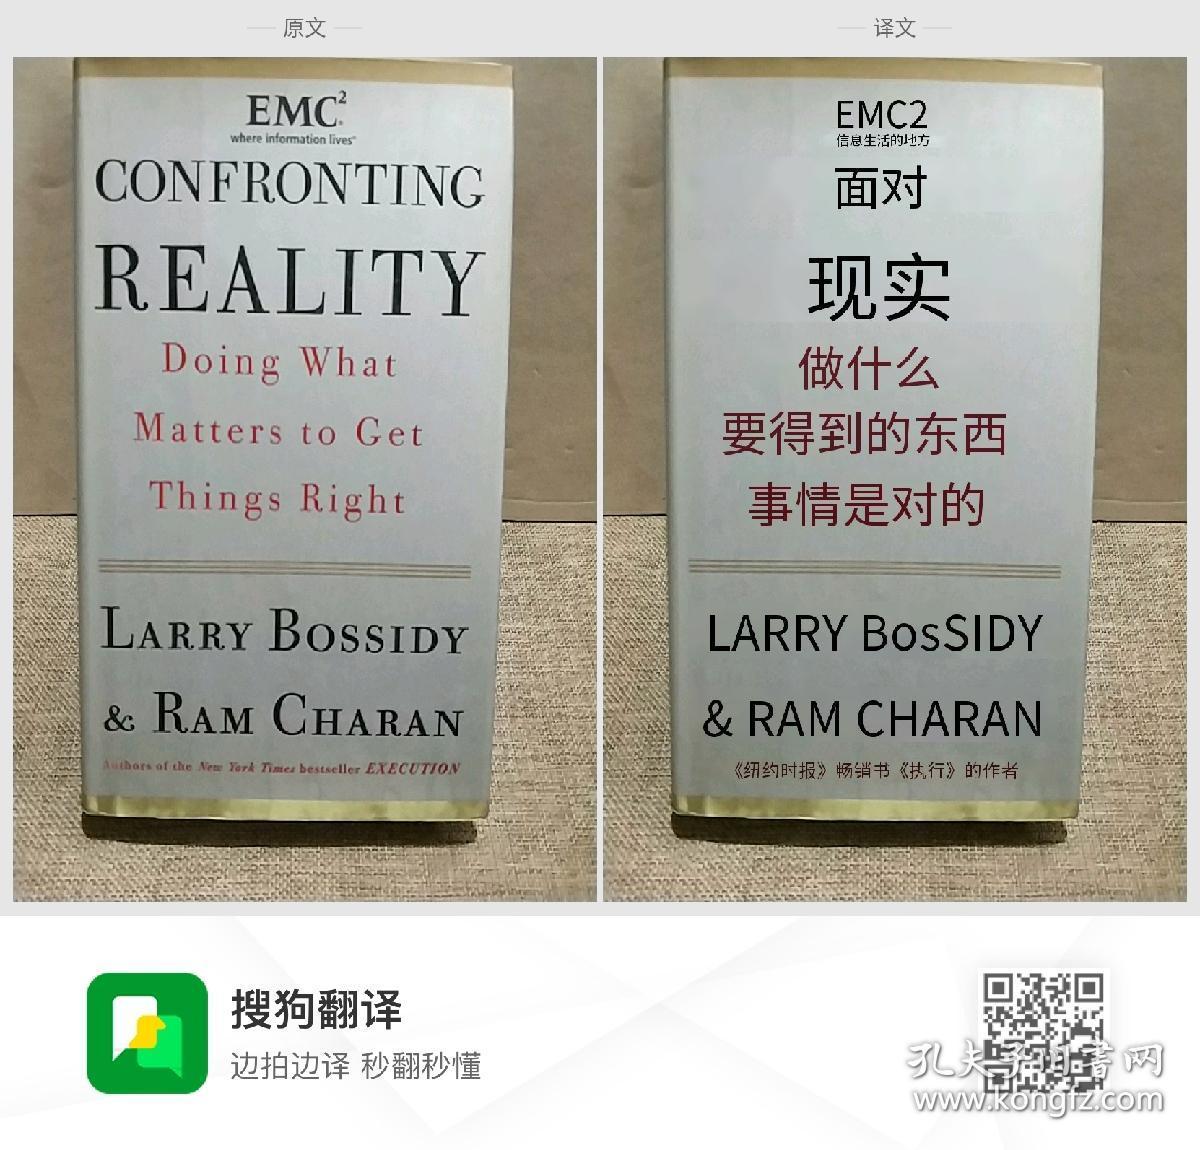 EMC2where information livesCONFRONTINGDoing WhatMatters to GetThings RightLARRY BosSIDY& RAM CHARANREALITYAuthers of the New lork Times bestseller EXECUTIONEMC2信息生信息生活的地方  面对  做什么  要得到的东西  事情是对的